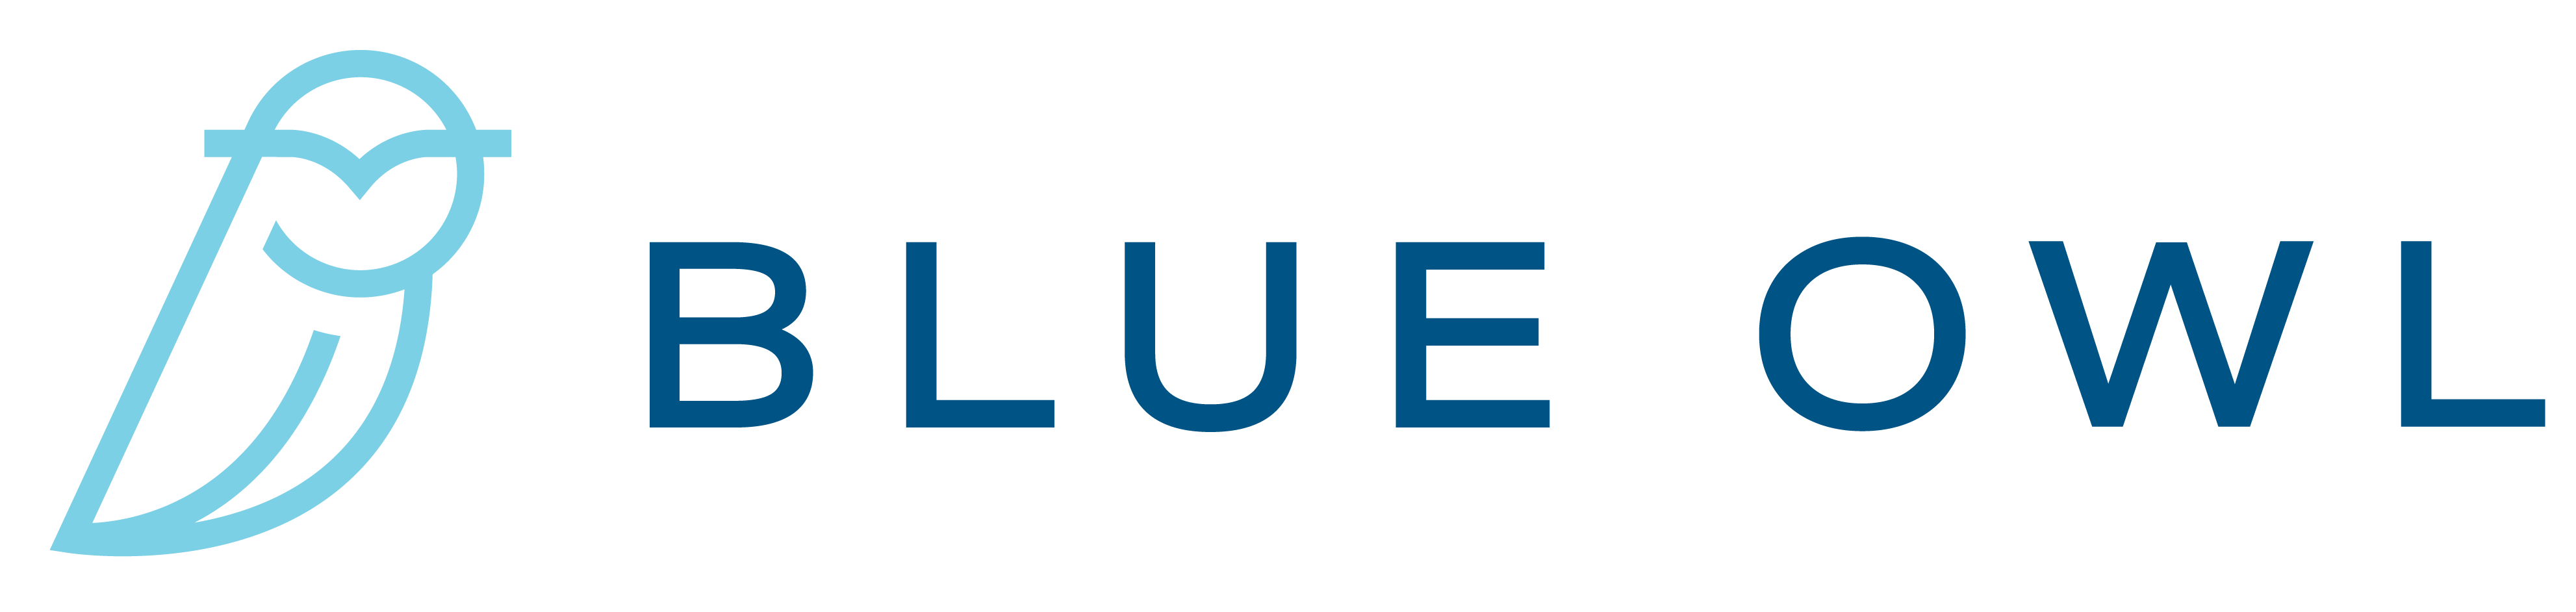 Blue Owl Capital (OBDC) increases dividend by 5.7% and announced special dividend of $0.08/share